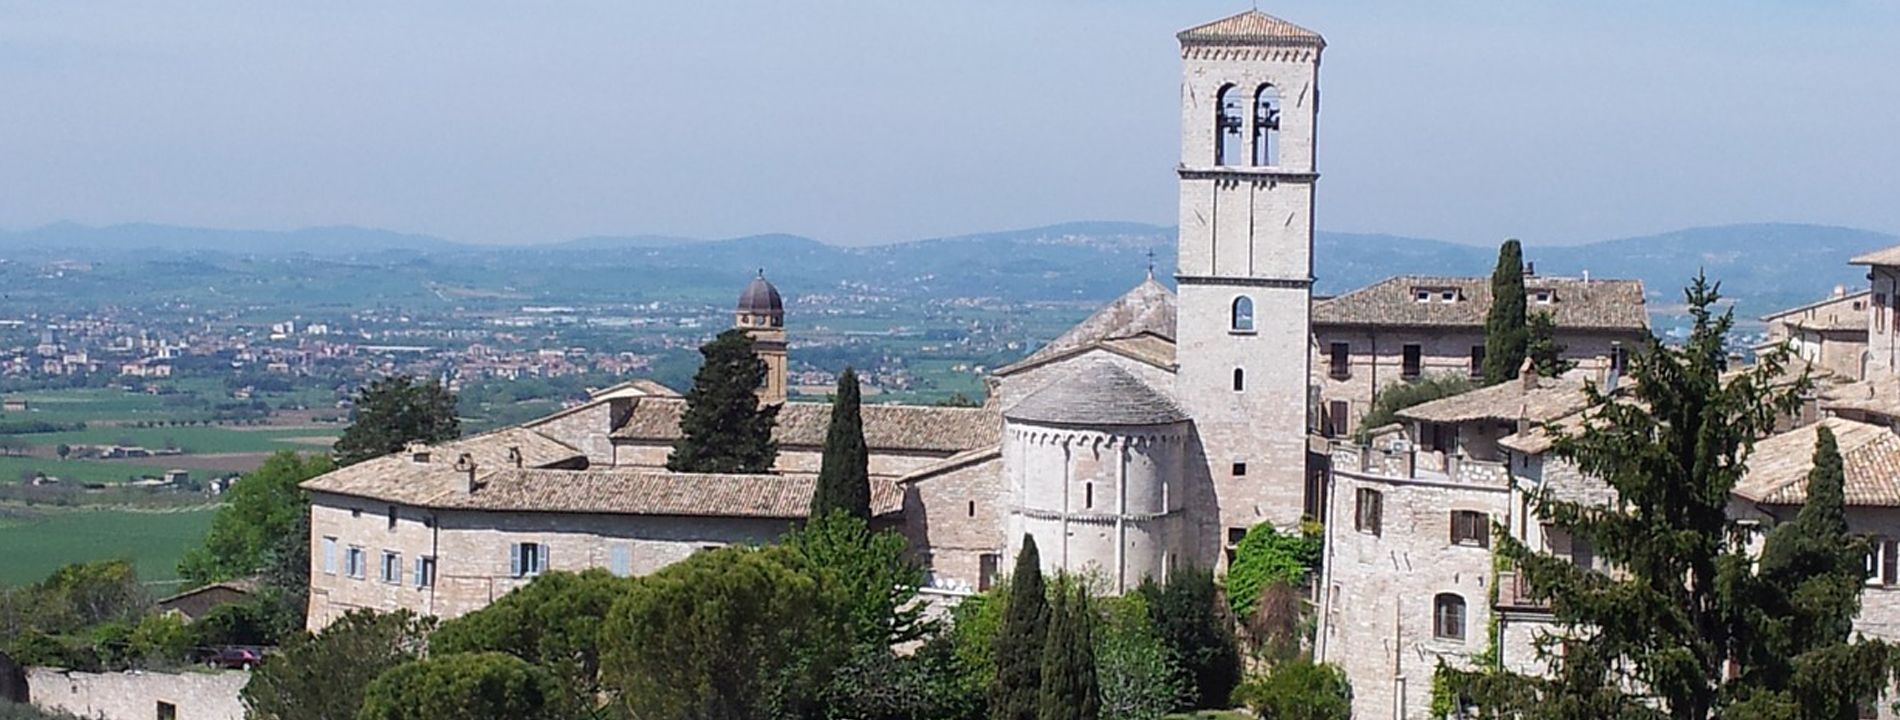 assisi-ltv-3